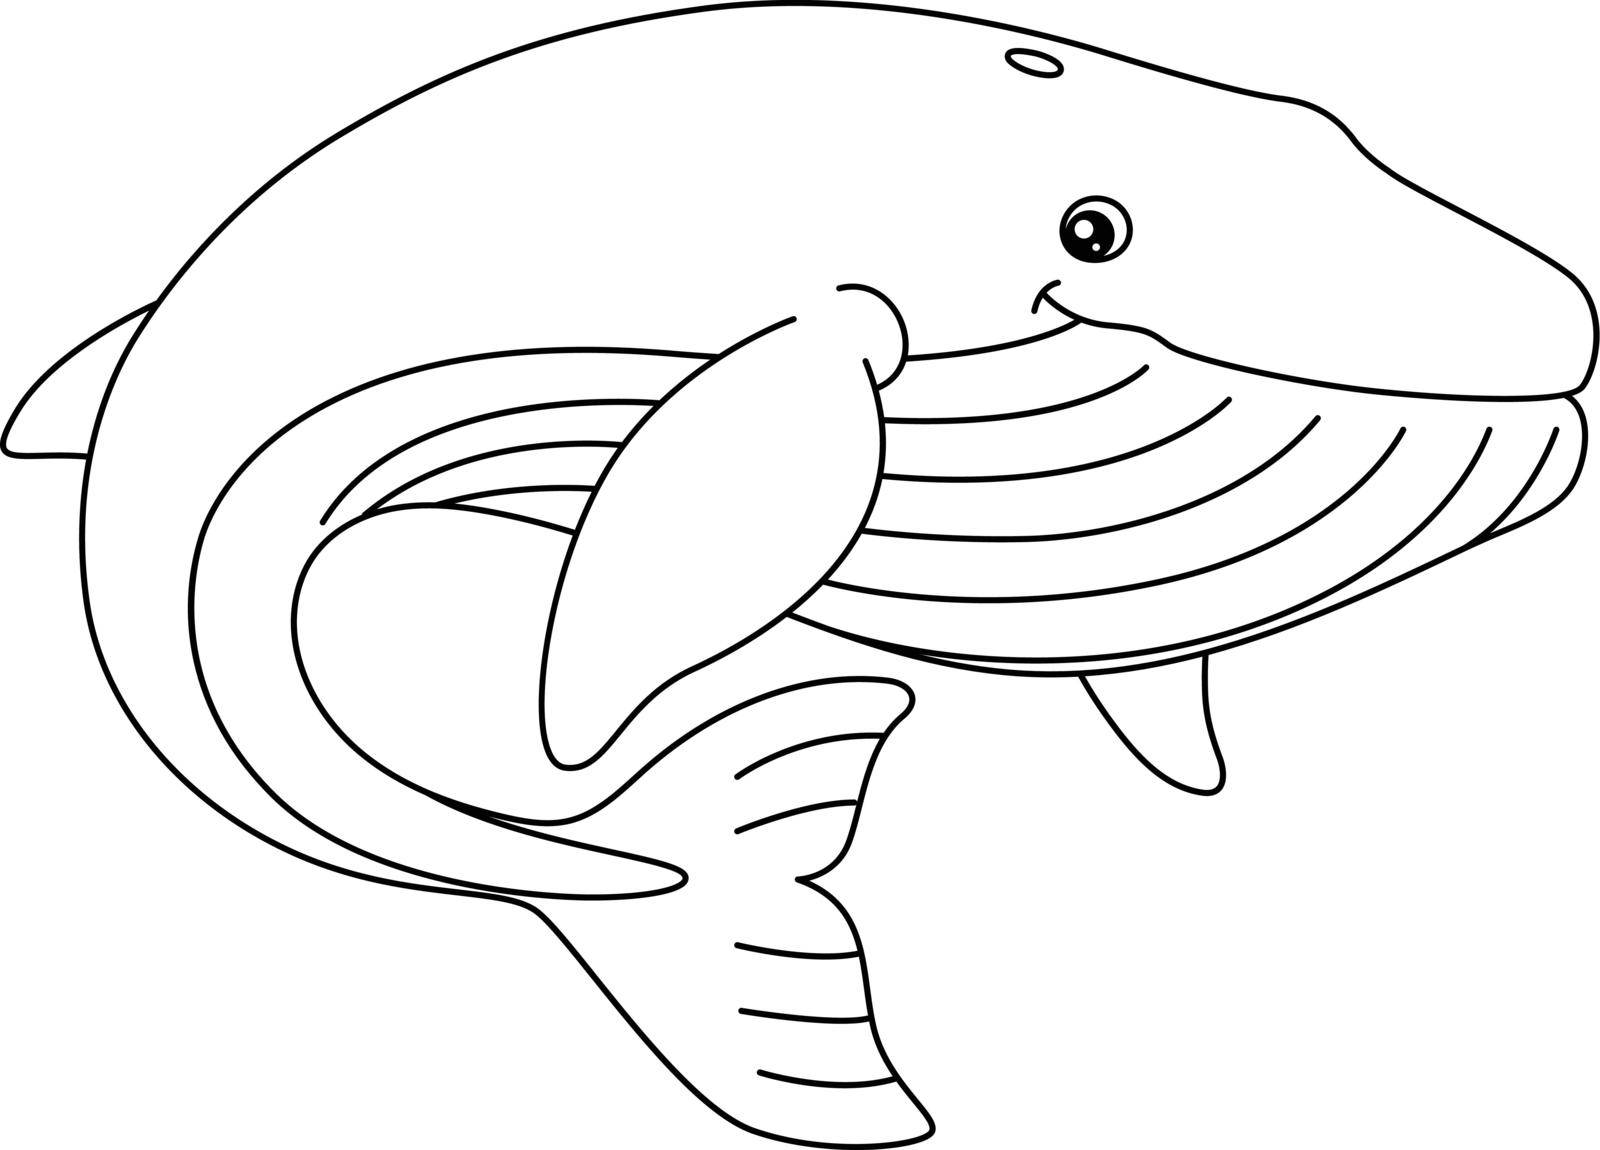 Blue Whale Coloring Page Isolated for Kids by abbydesign